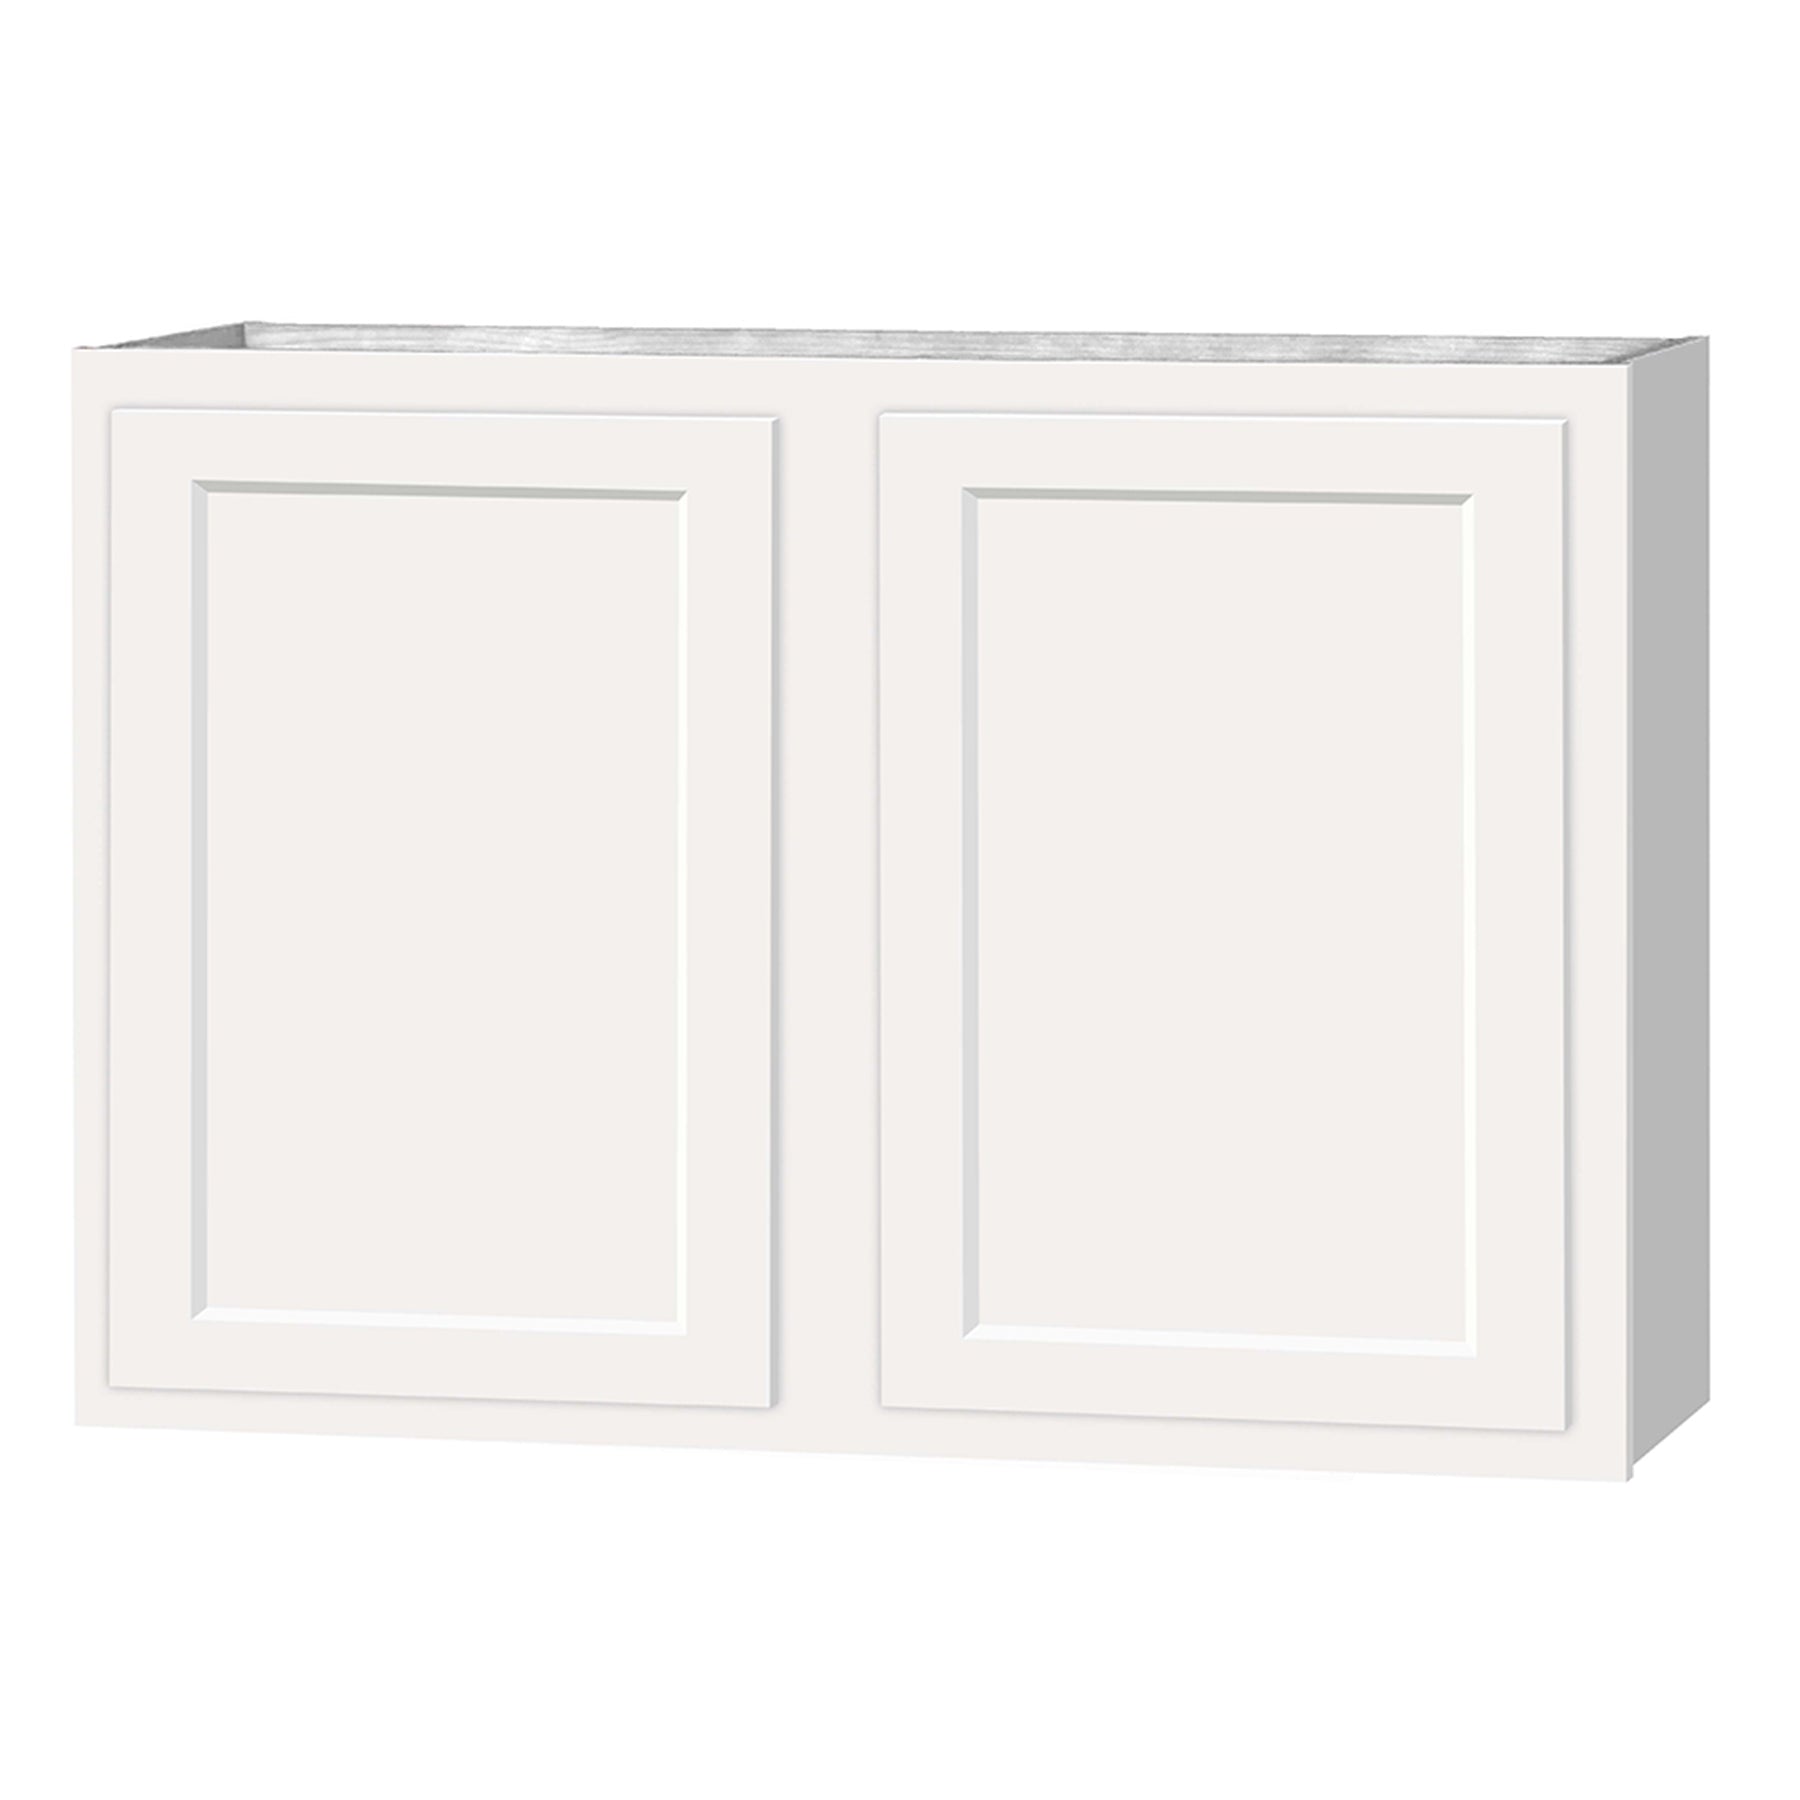 30 inch Wall Cabinets - Dwhite Shaker - 42 Inch W x 30 Inch H x 12 Inch D